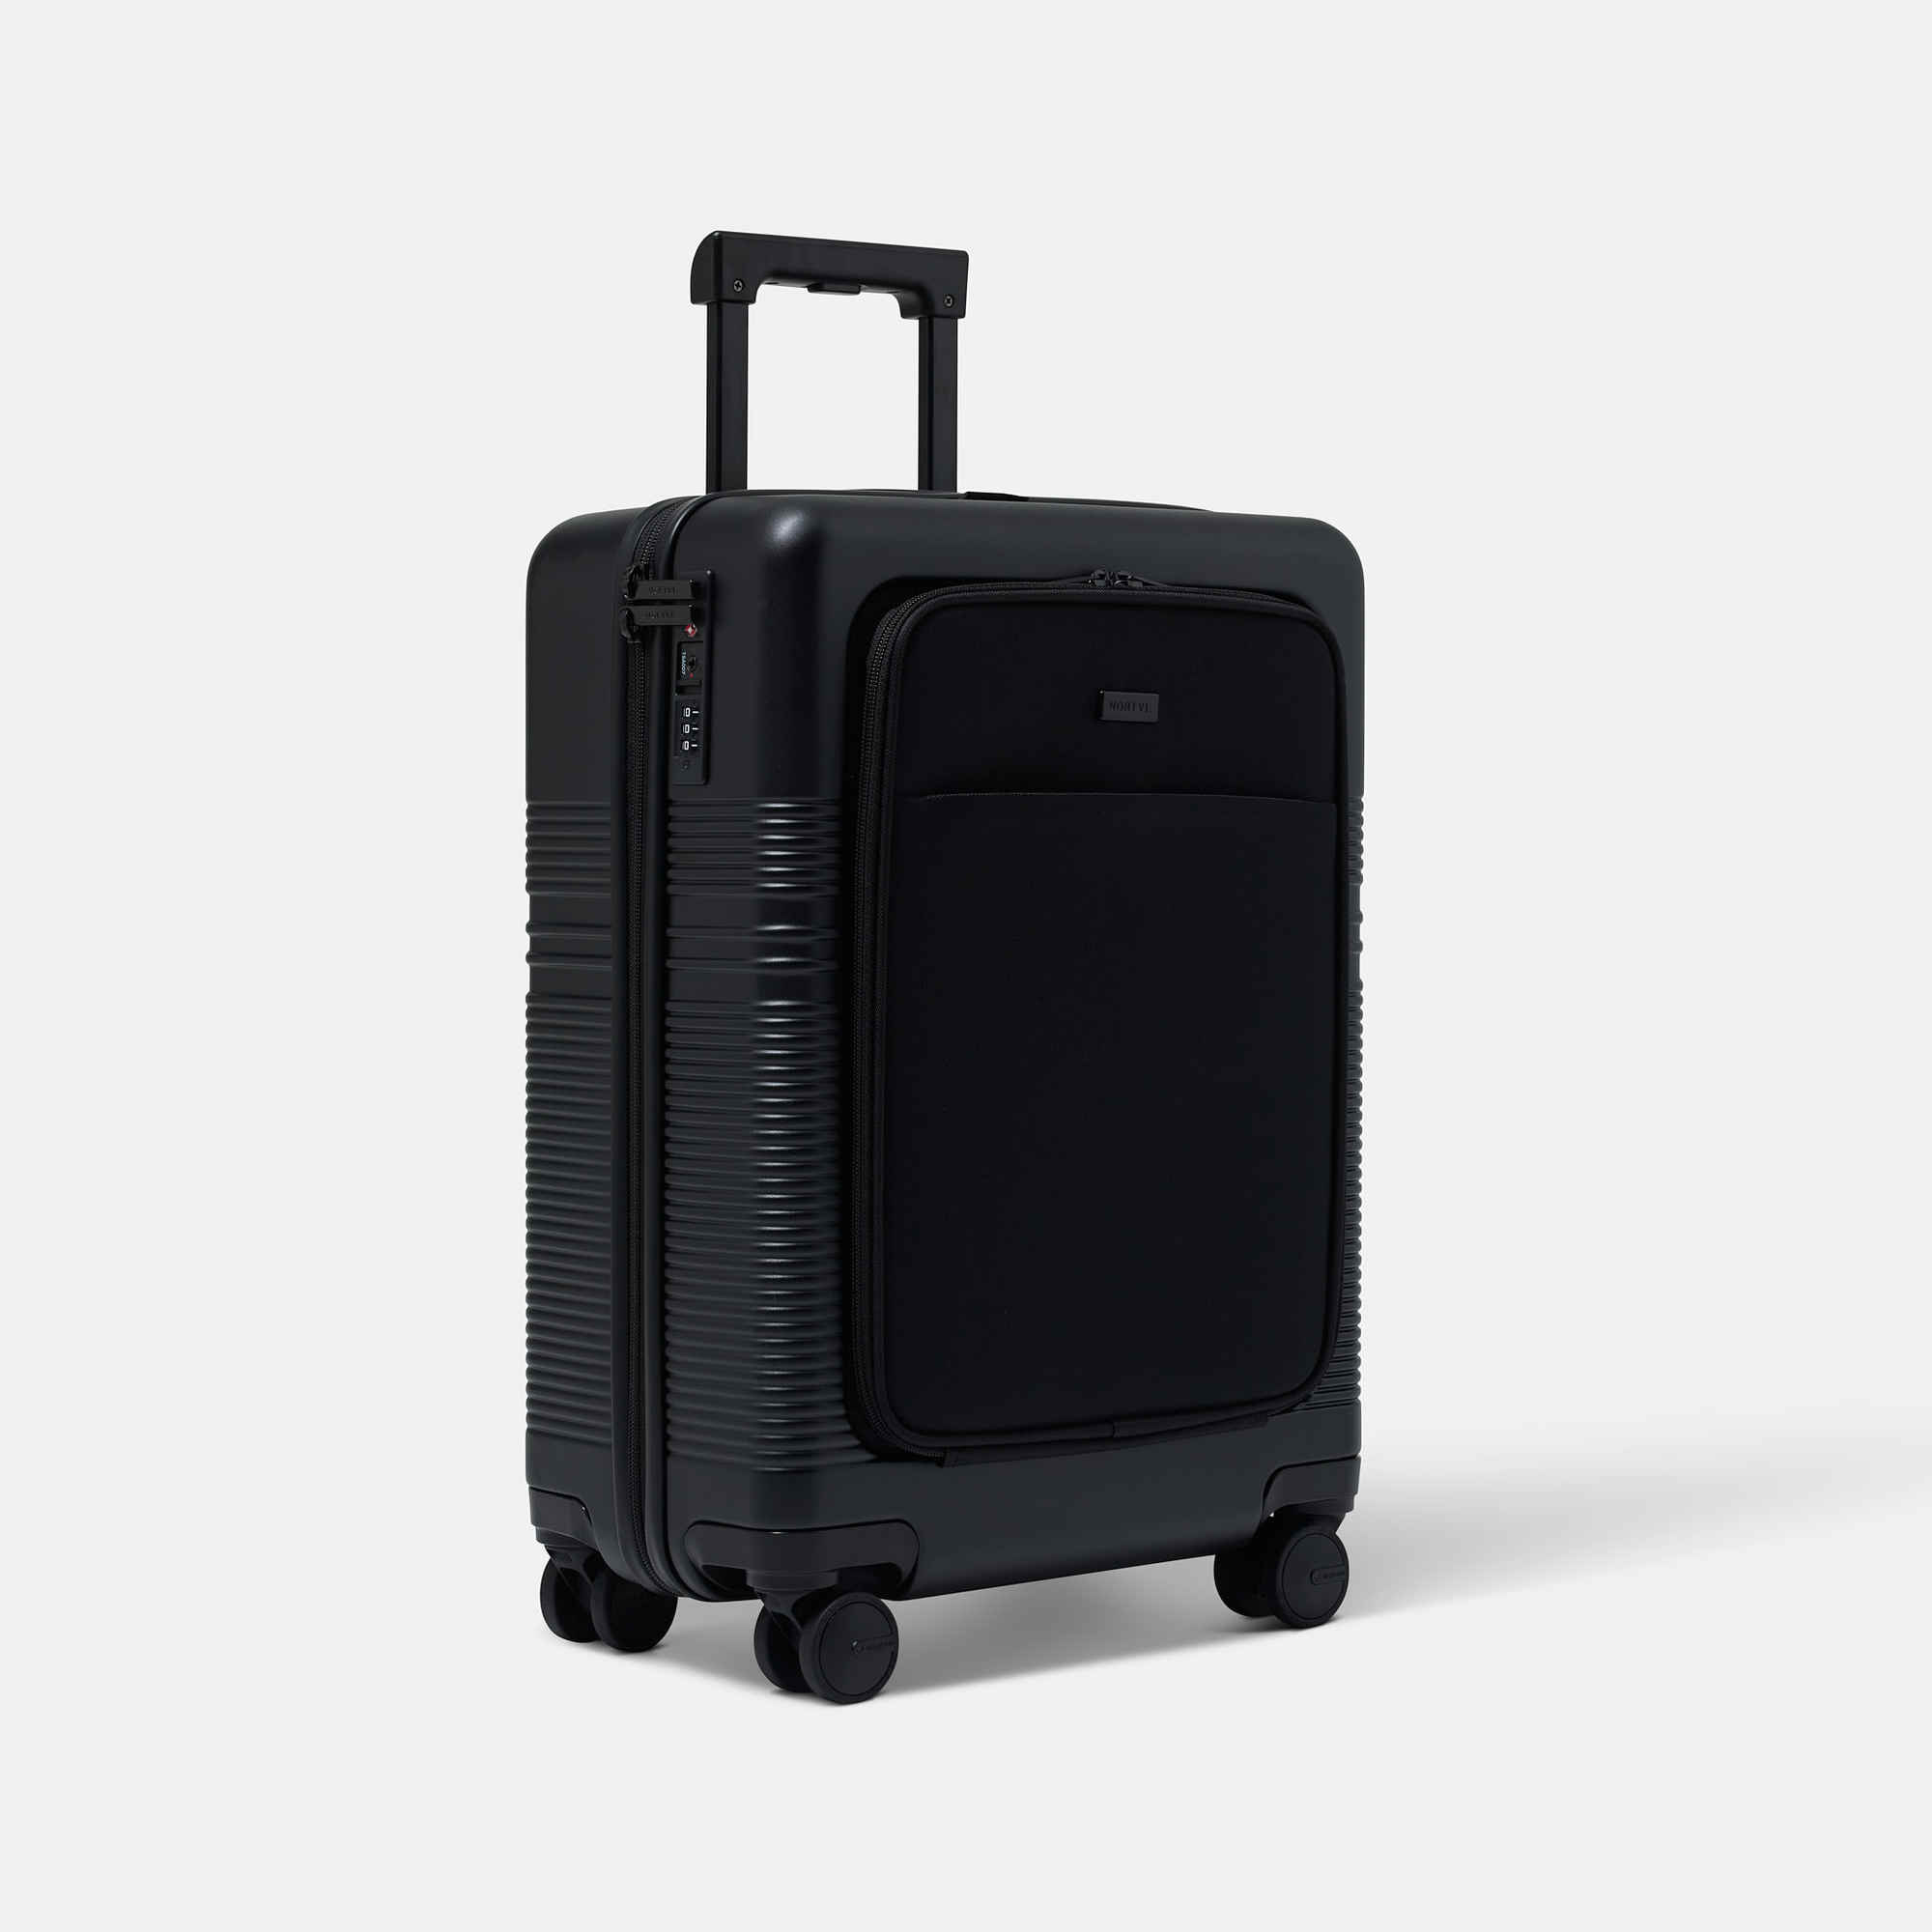 NORTVI sustainable design black suitcase with laptop compartment made of durable material. Perfect travel trolley to use as hand luggage.